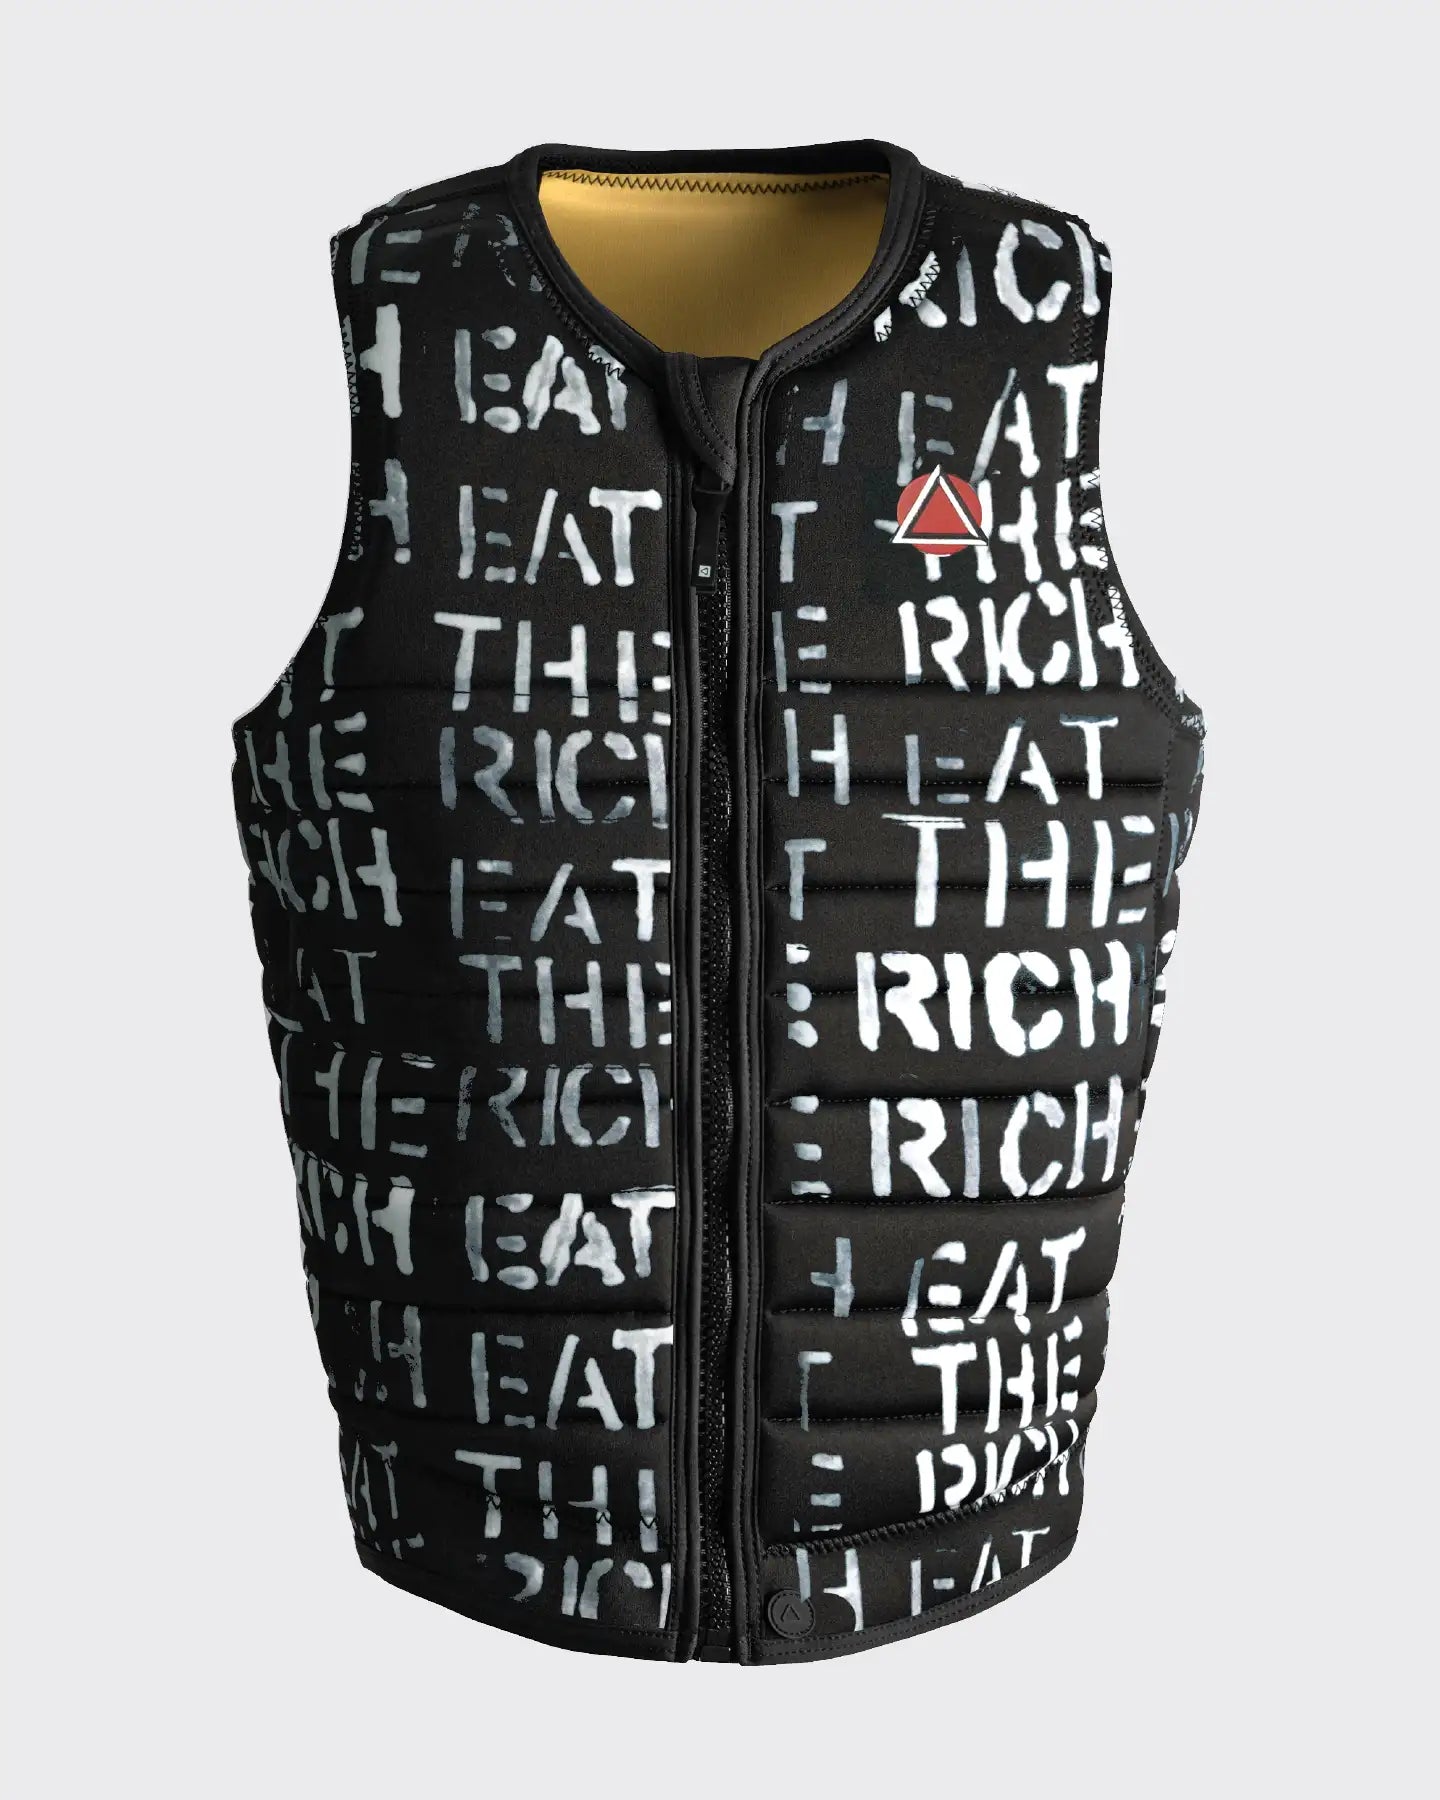 Follow Primary Heights Impact Vest - Eat The